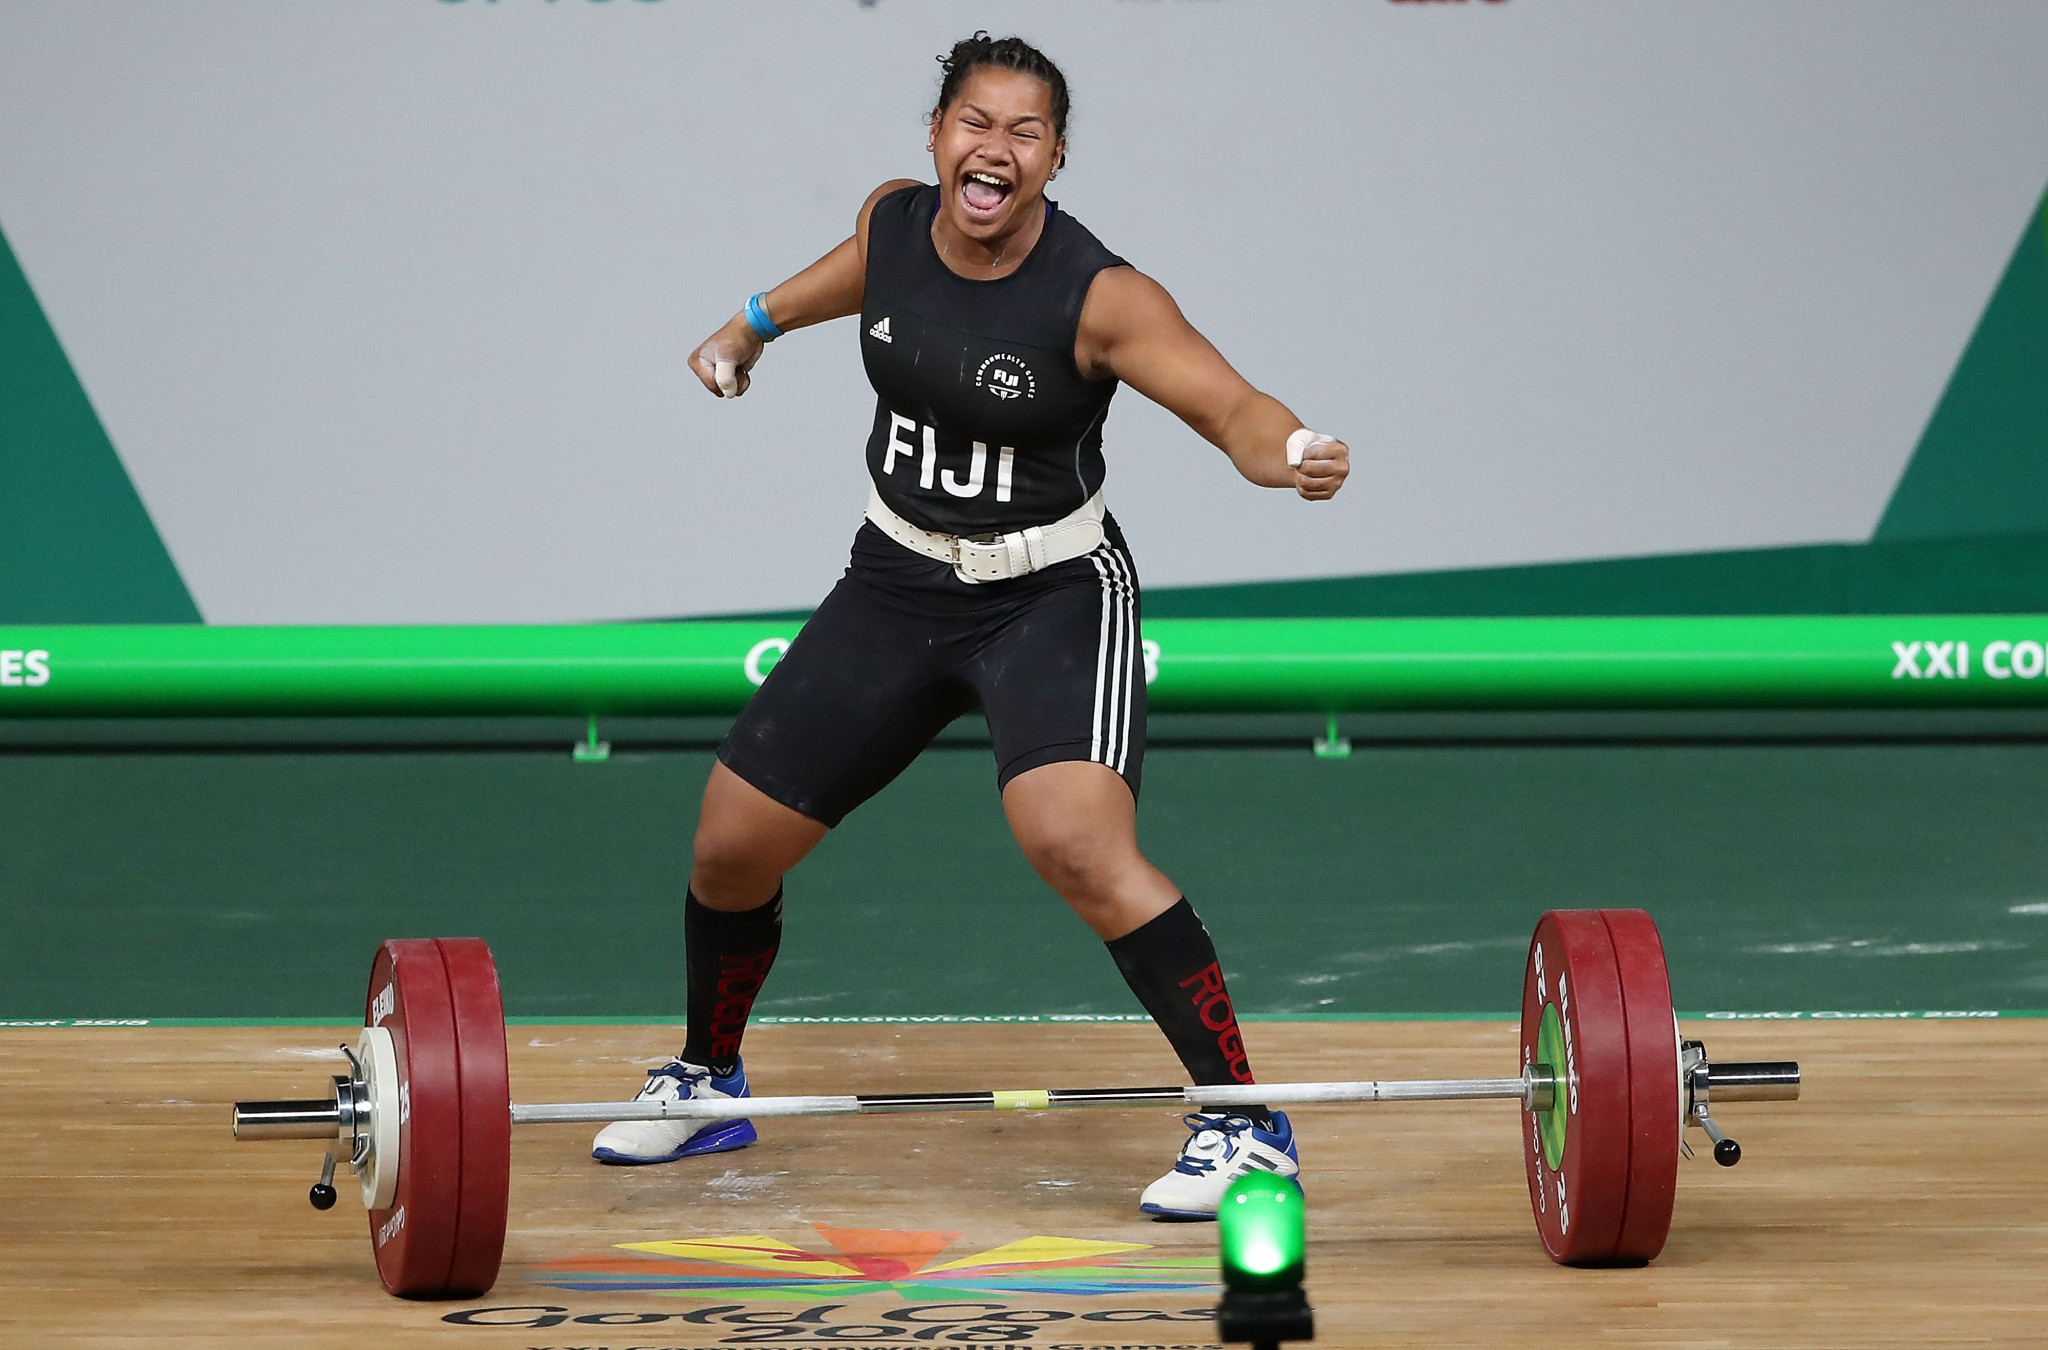 Eileen Cikamatana competed for Fiji at the 2018 Commonwealth Games in Gold Coast ©Getty Images